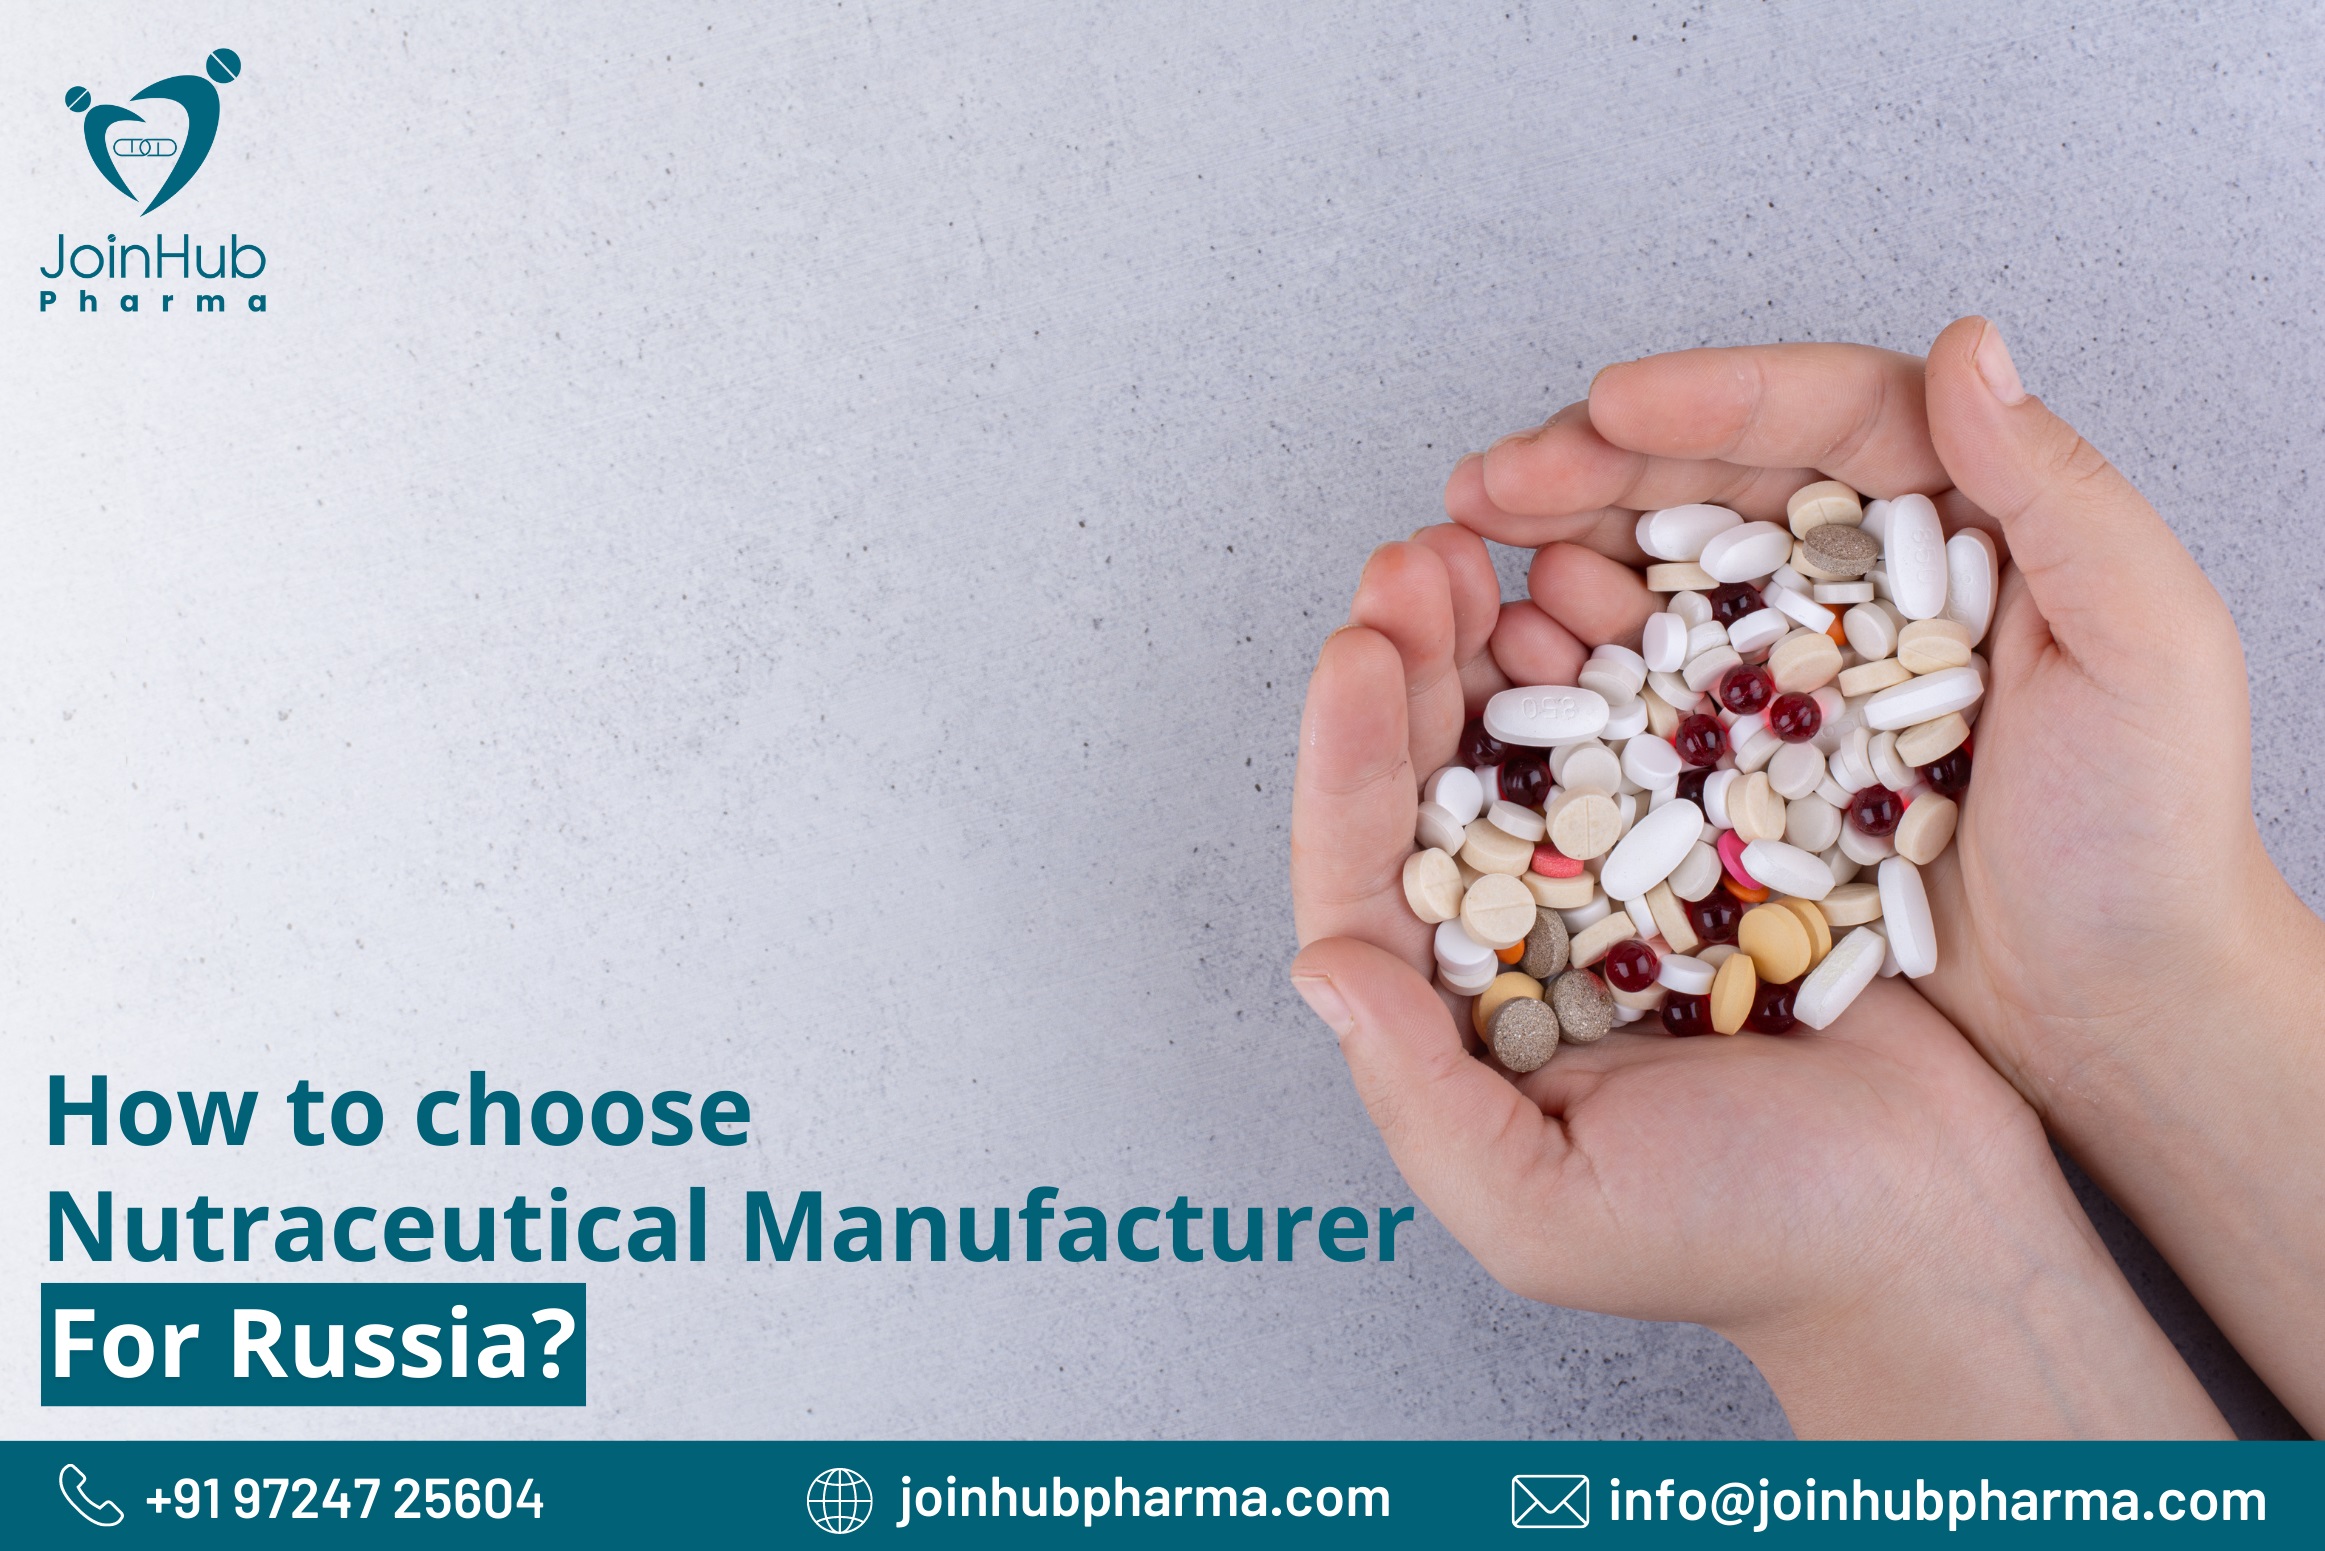 How to choose a Nutraceutical manufacturer for Russia?